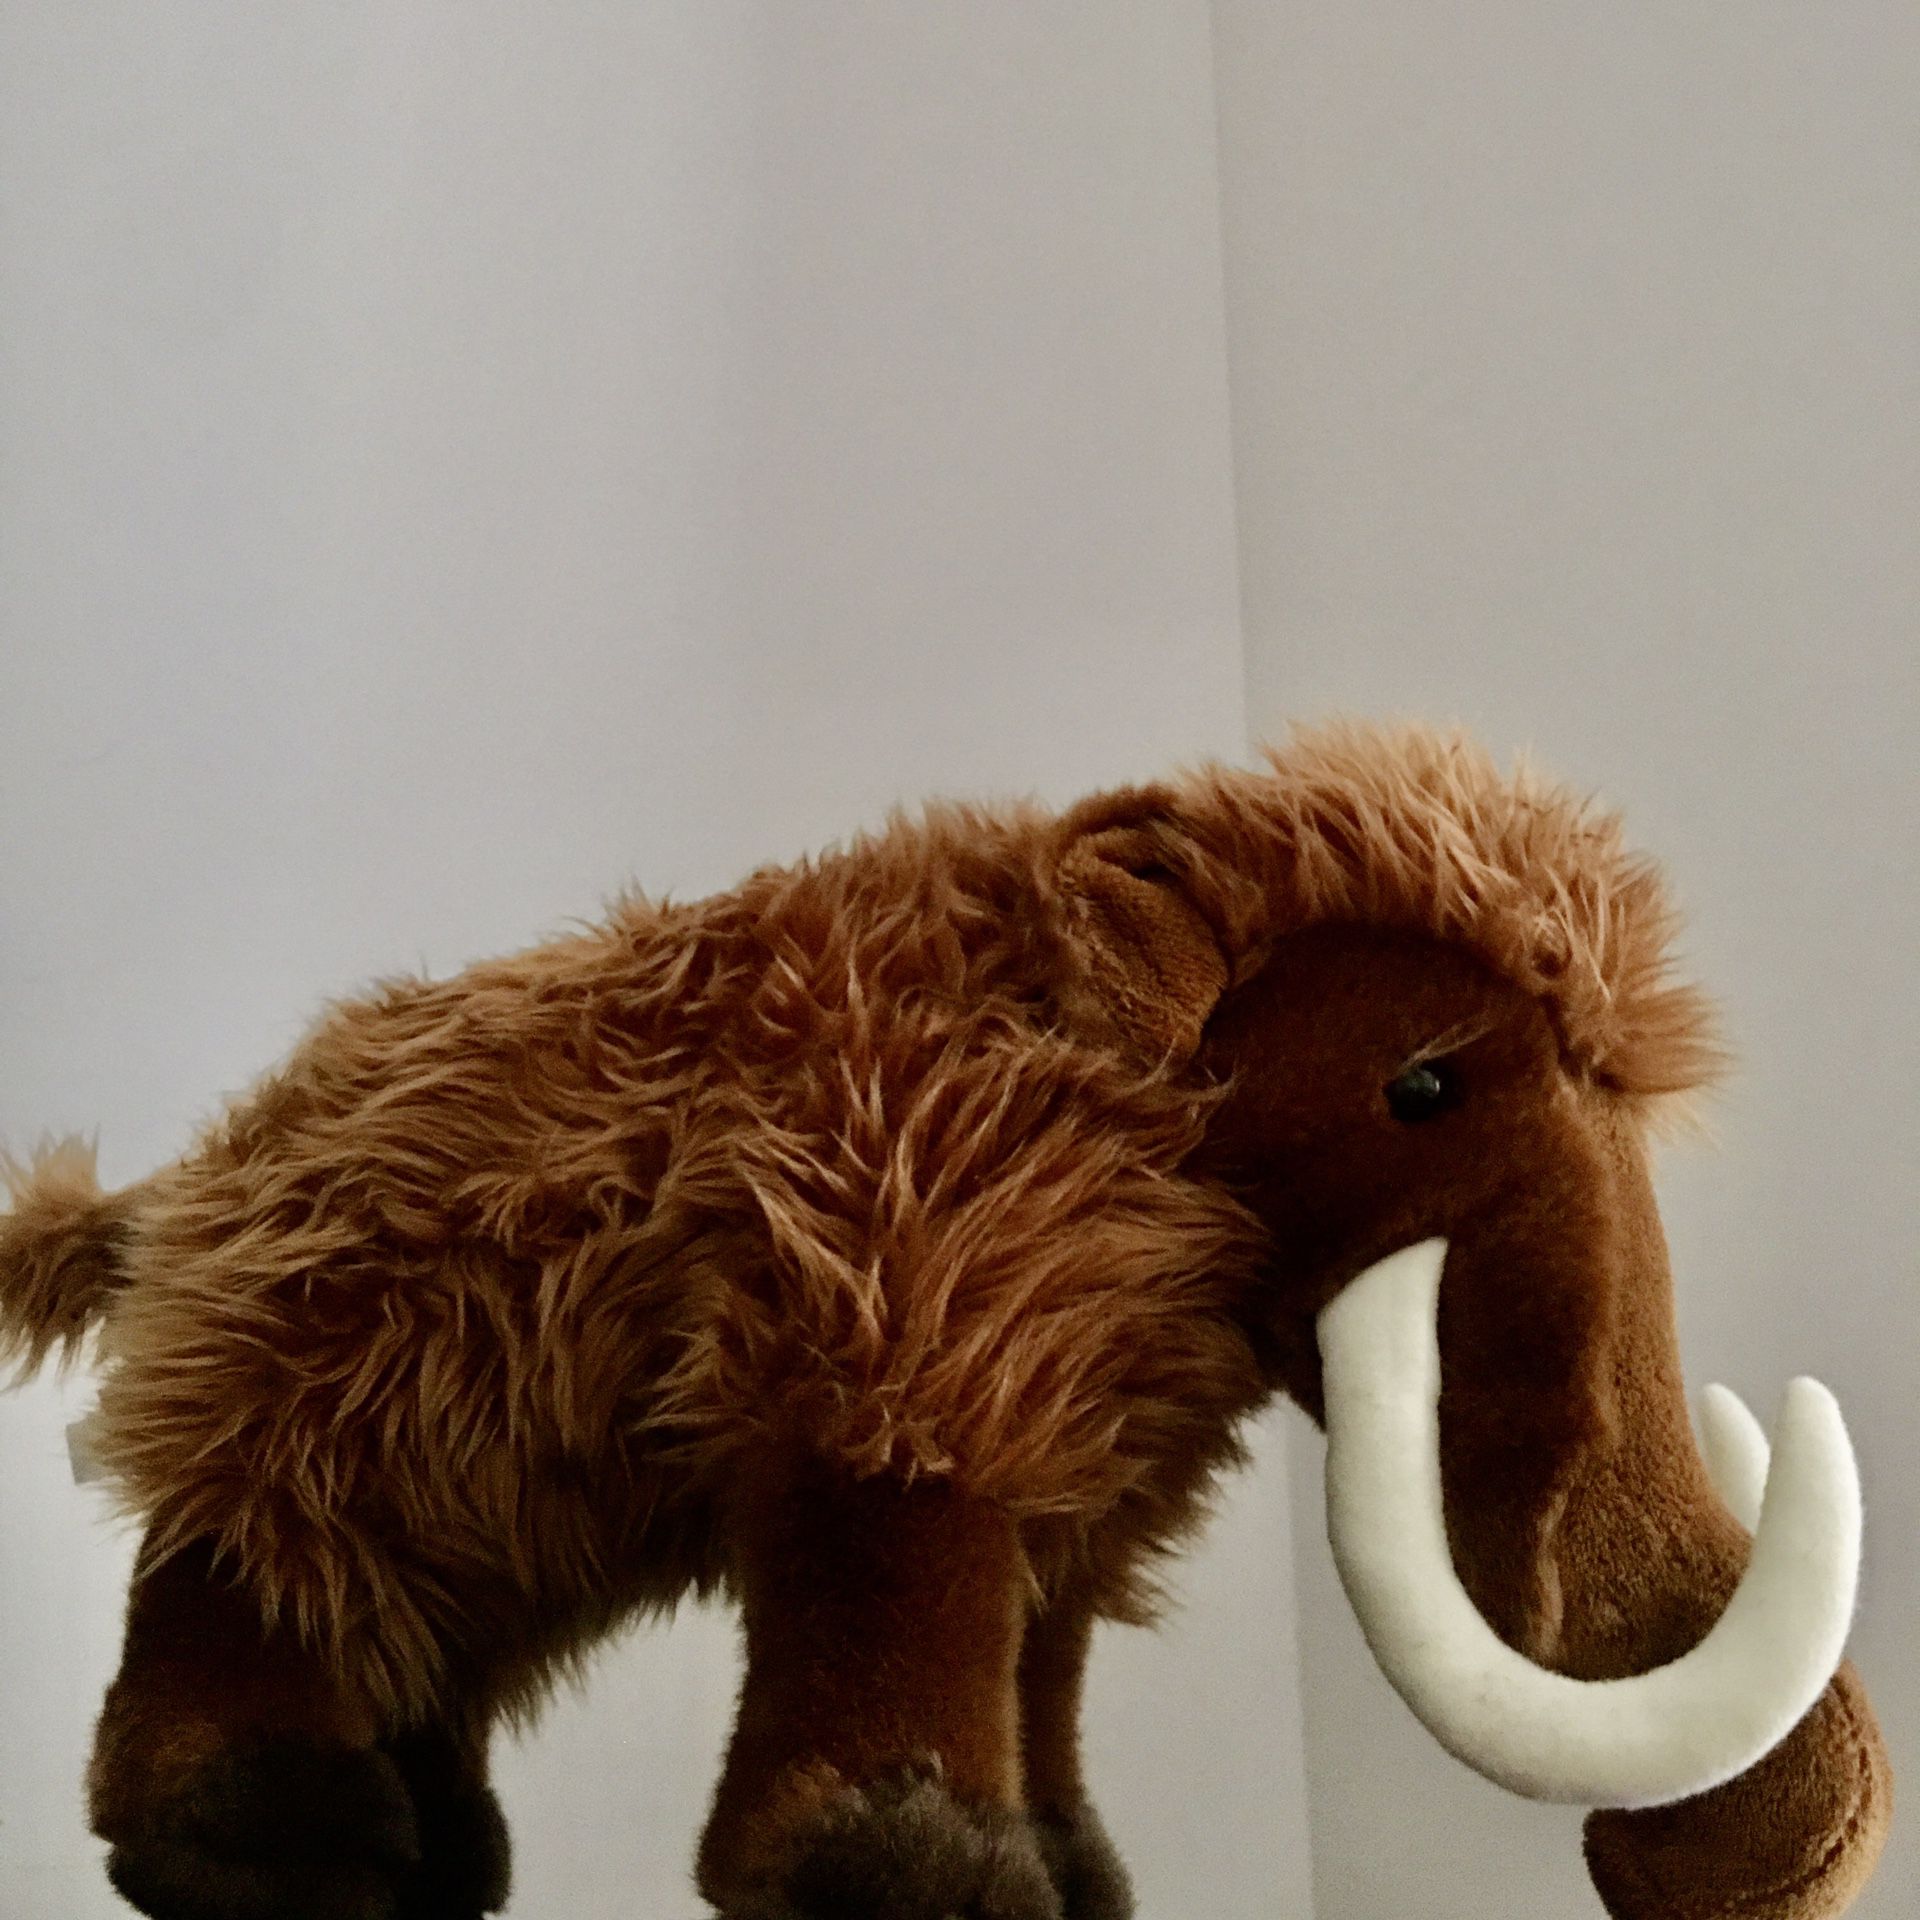 SALE: Unused + Sanitized Perfect Condition Wolly Mammoth Kids Toy Douglas Brand